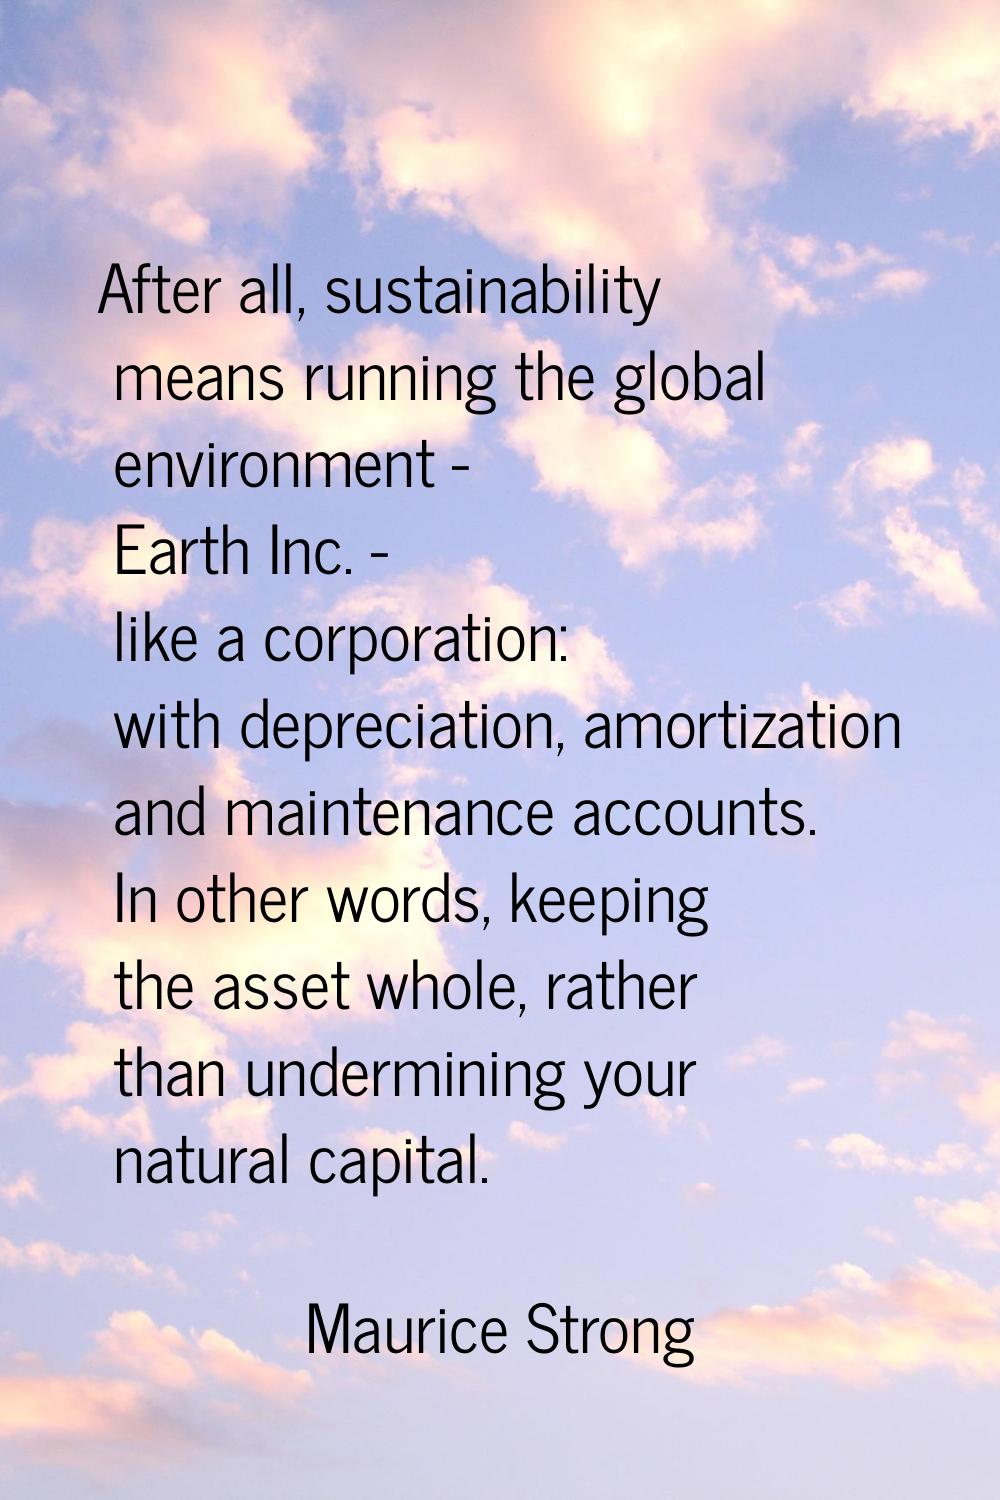 After all, sustainability means running the global environment - Earth Inc. - like a corporation: w